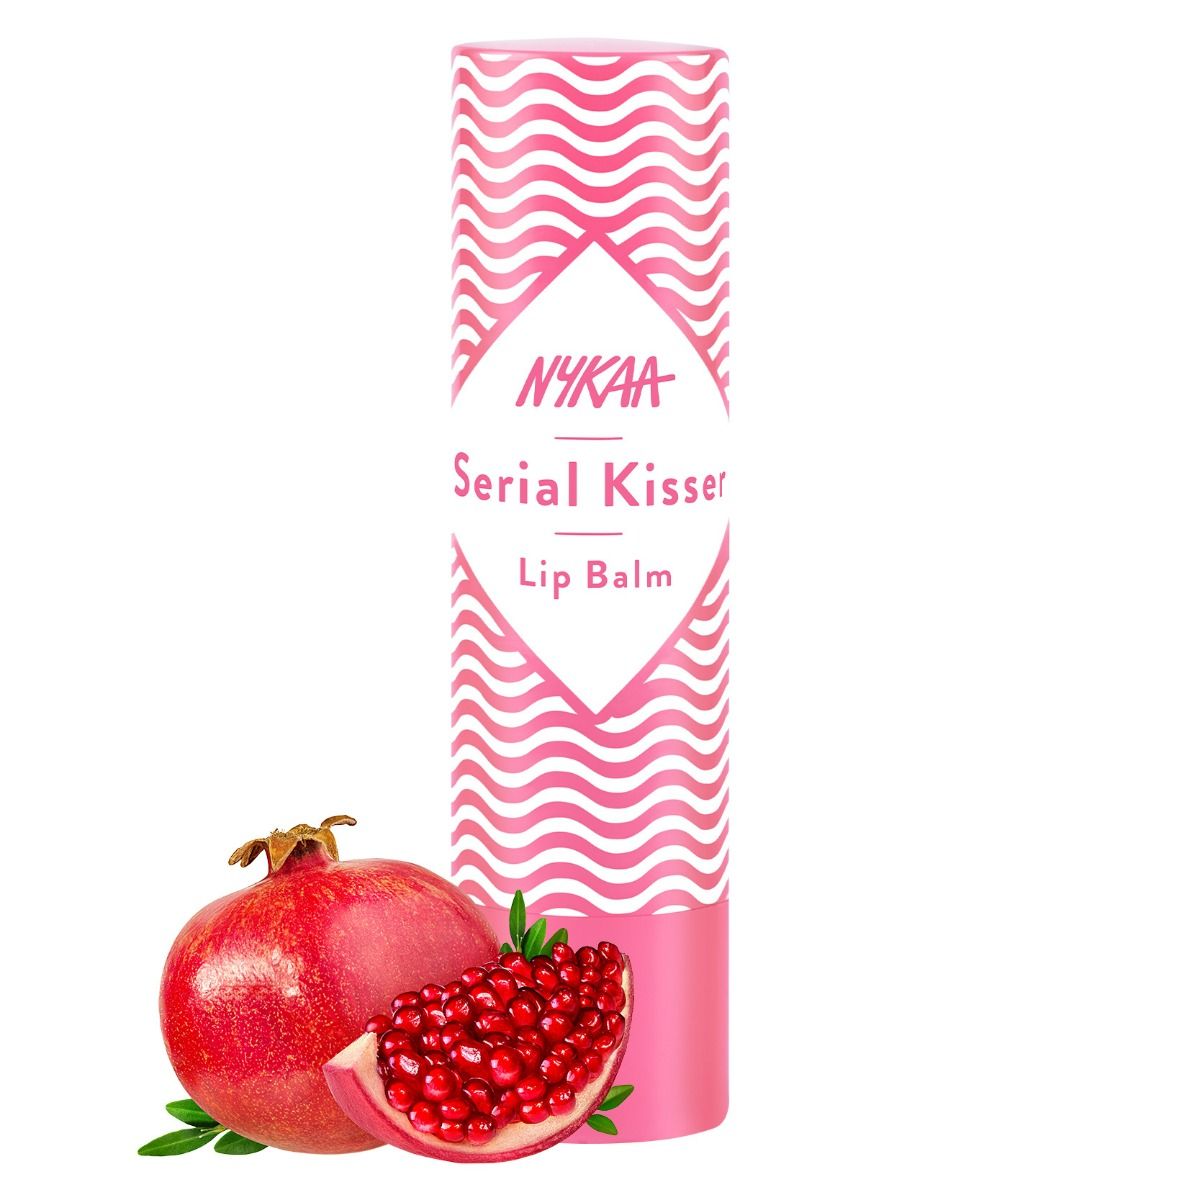 Buy Nykaa Serial Kisser Pomegranate Flavour Lip Balm, 4.5 gm Online